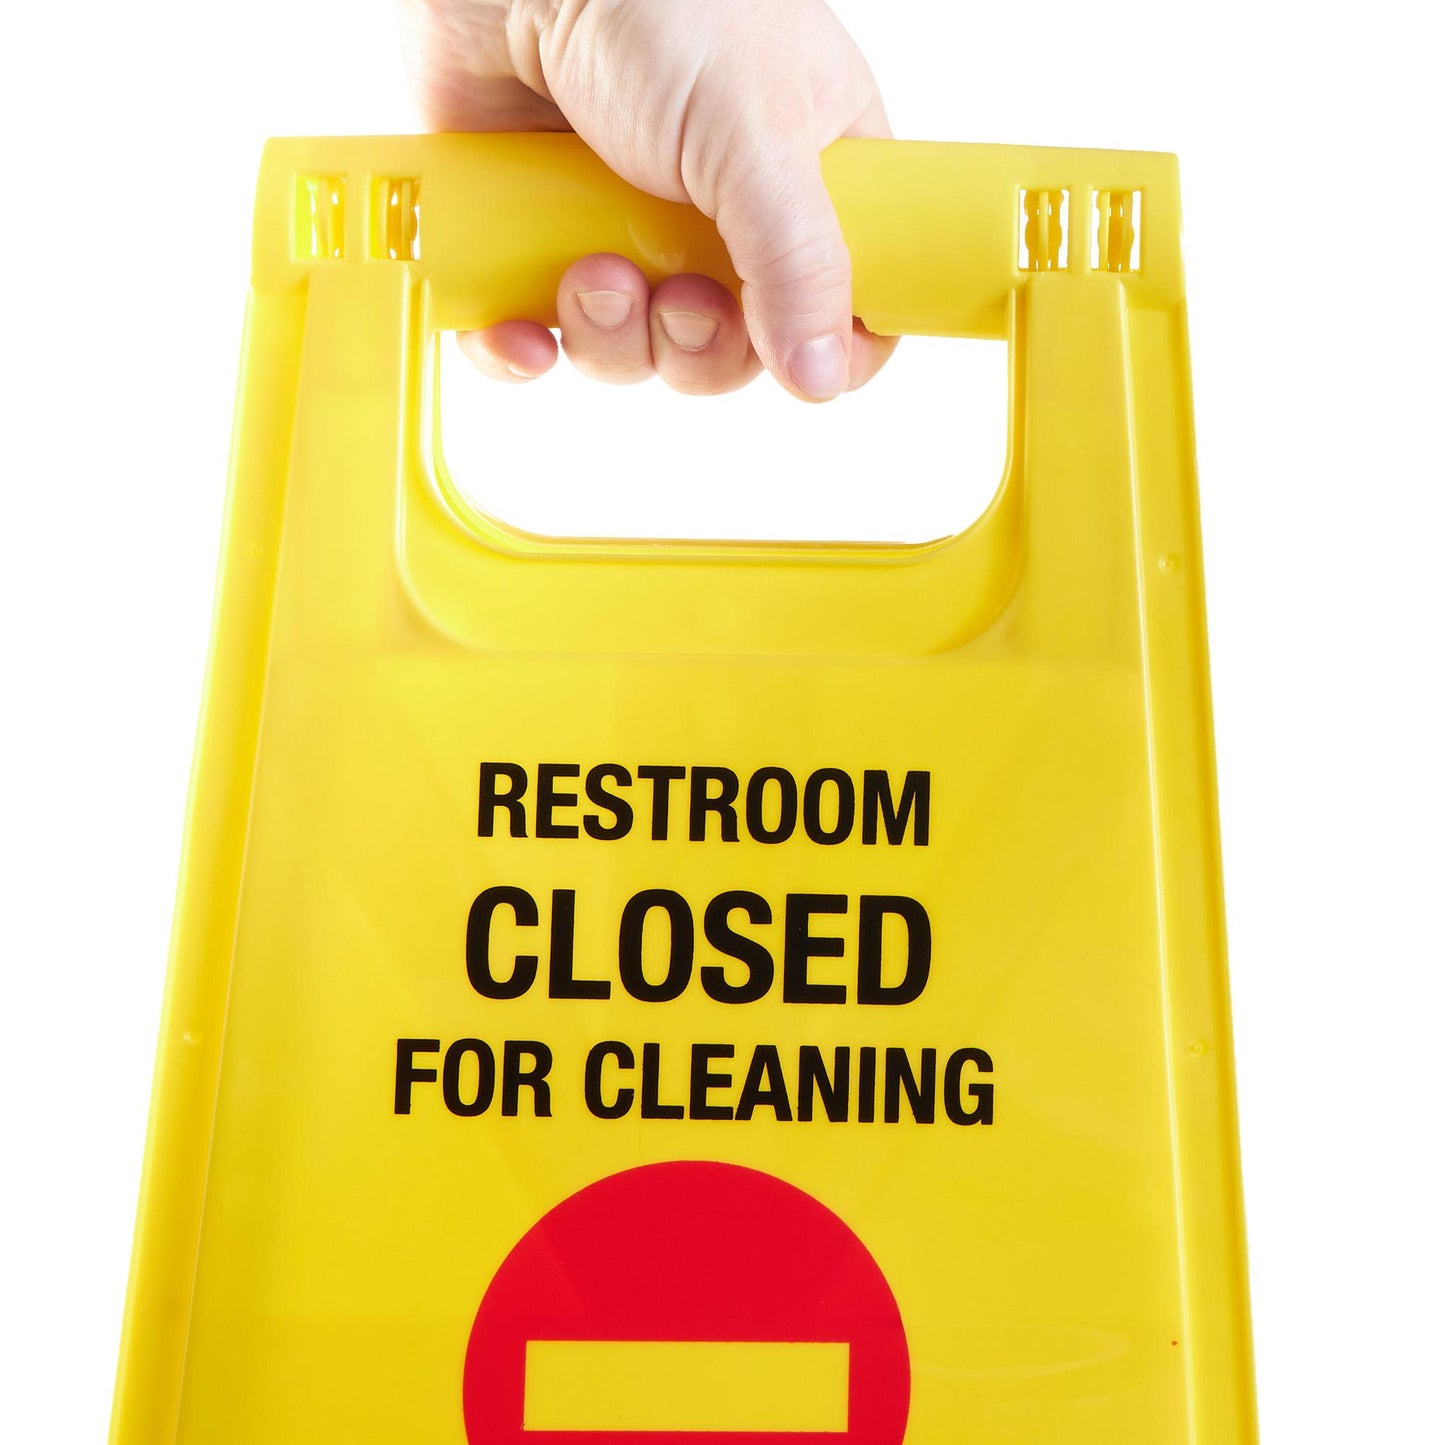 Restroom Closed for Cleaning Bilingual Floor Sign